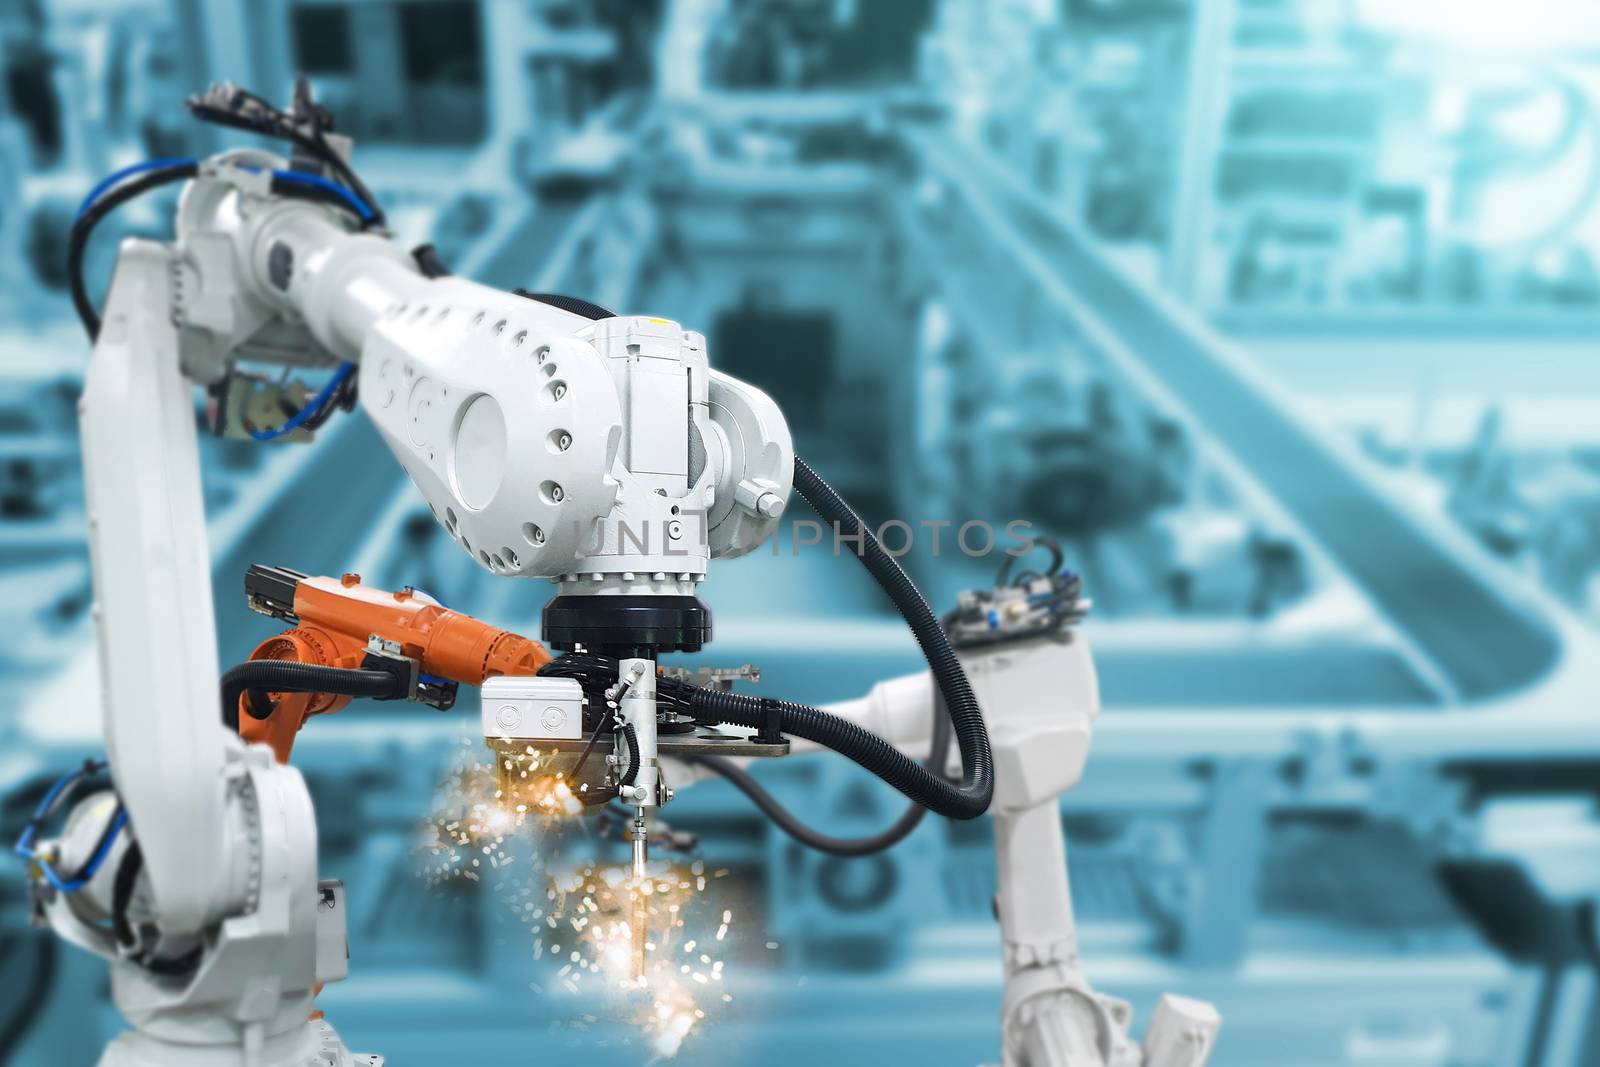 Robotic arms, industrial robots, factory automation machines by sompongtom